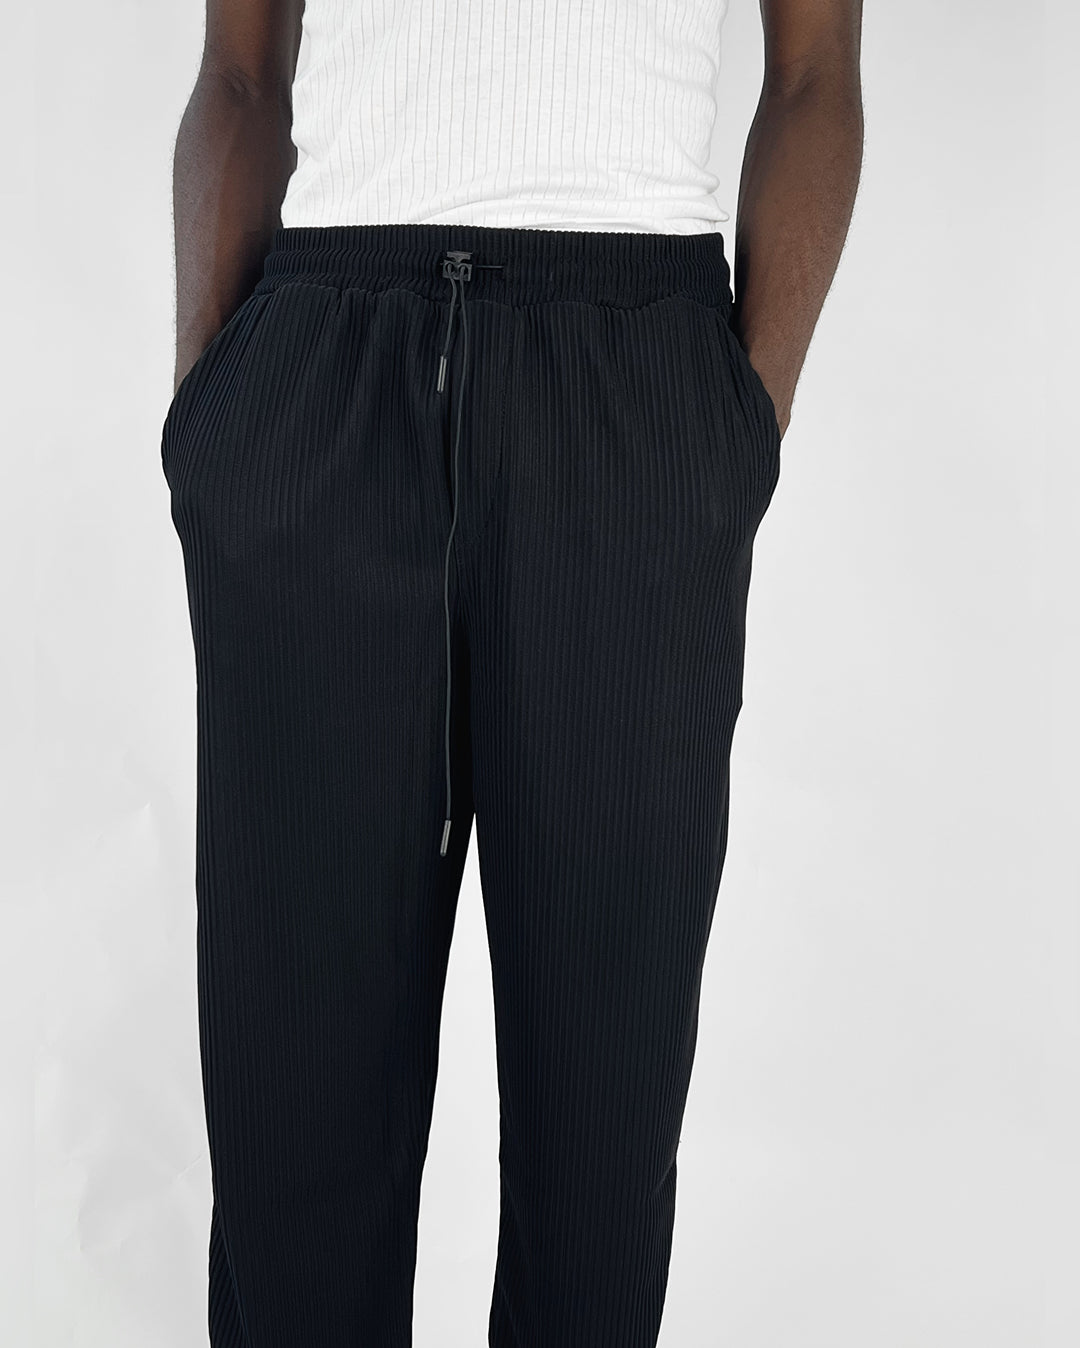 Spruce pleated pants with toggle drawstring in black